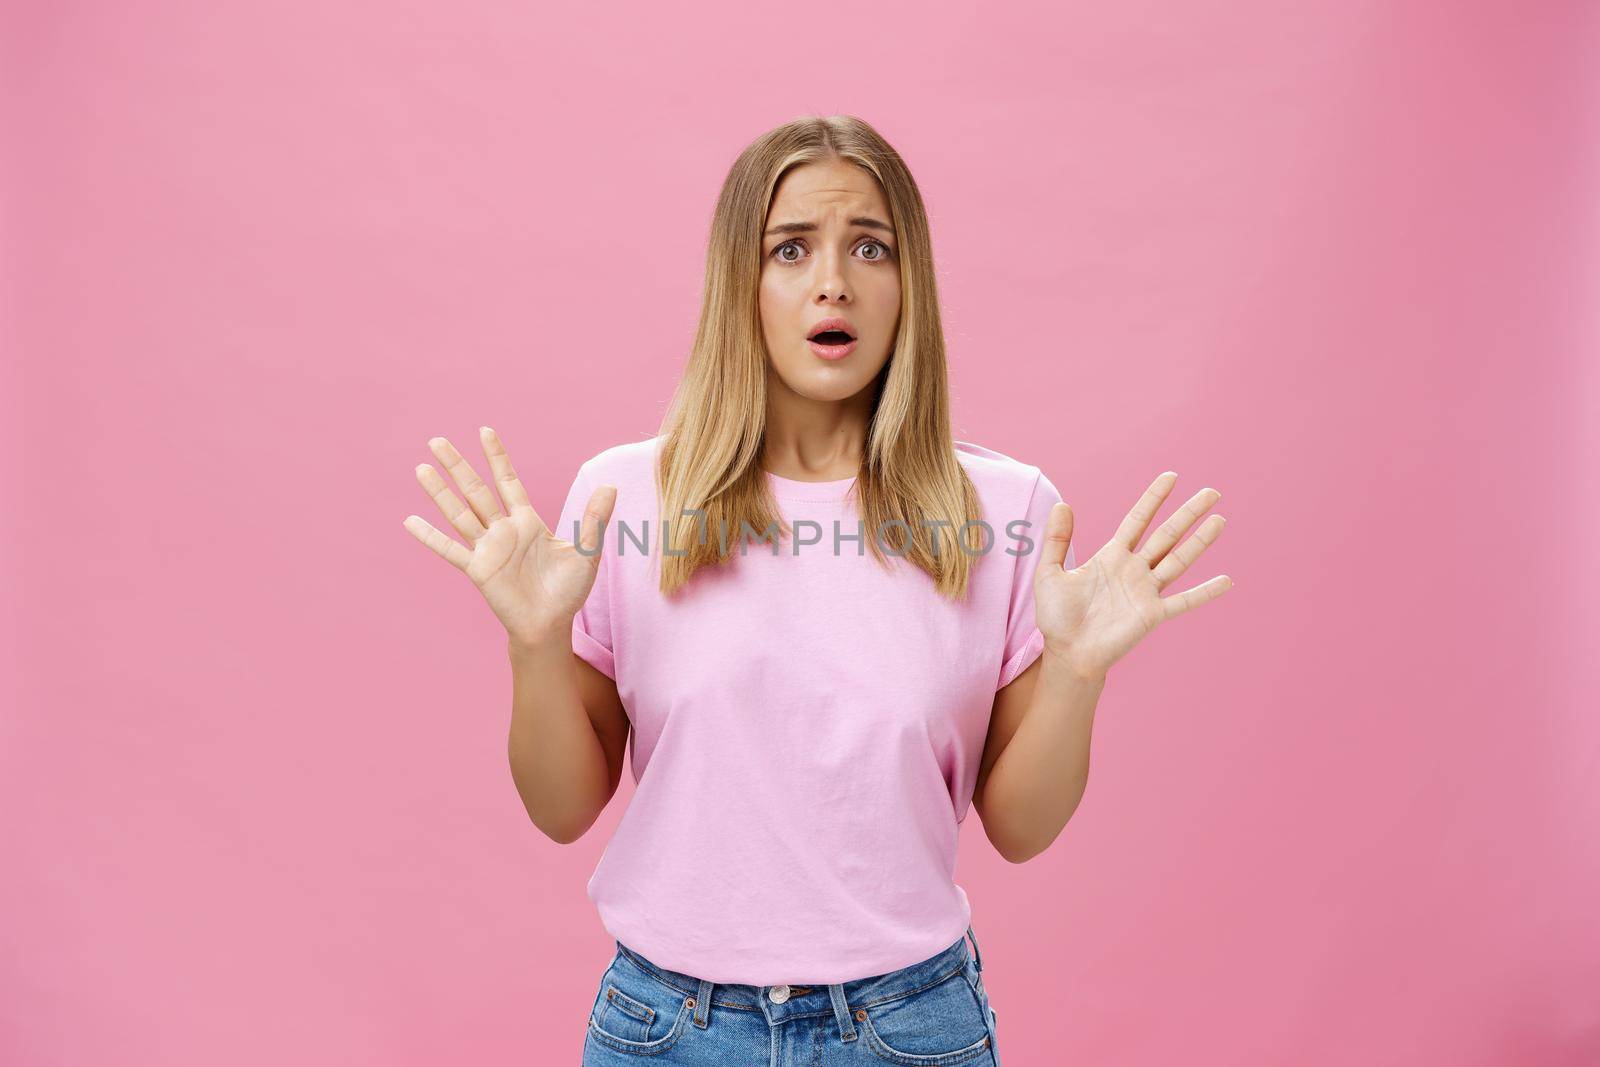 Woman looking nervous explaining with panicking gestures she not involved frowning opening mouth and gasping feeling concerned and worried waving hands over chest posing against pink wall. Copy space